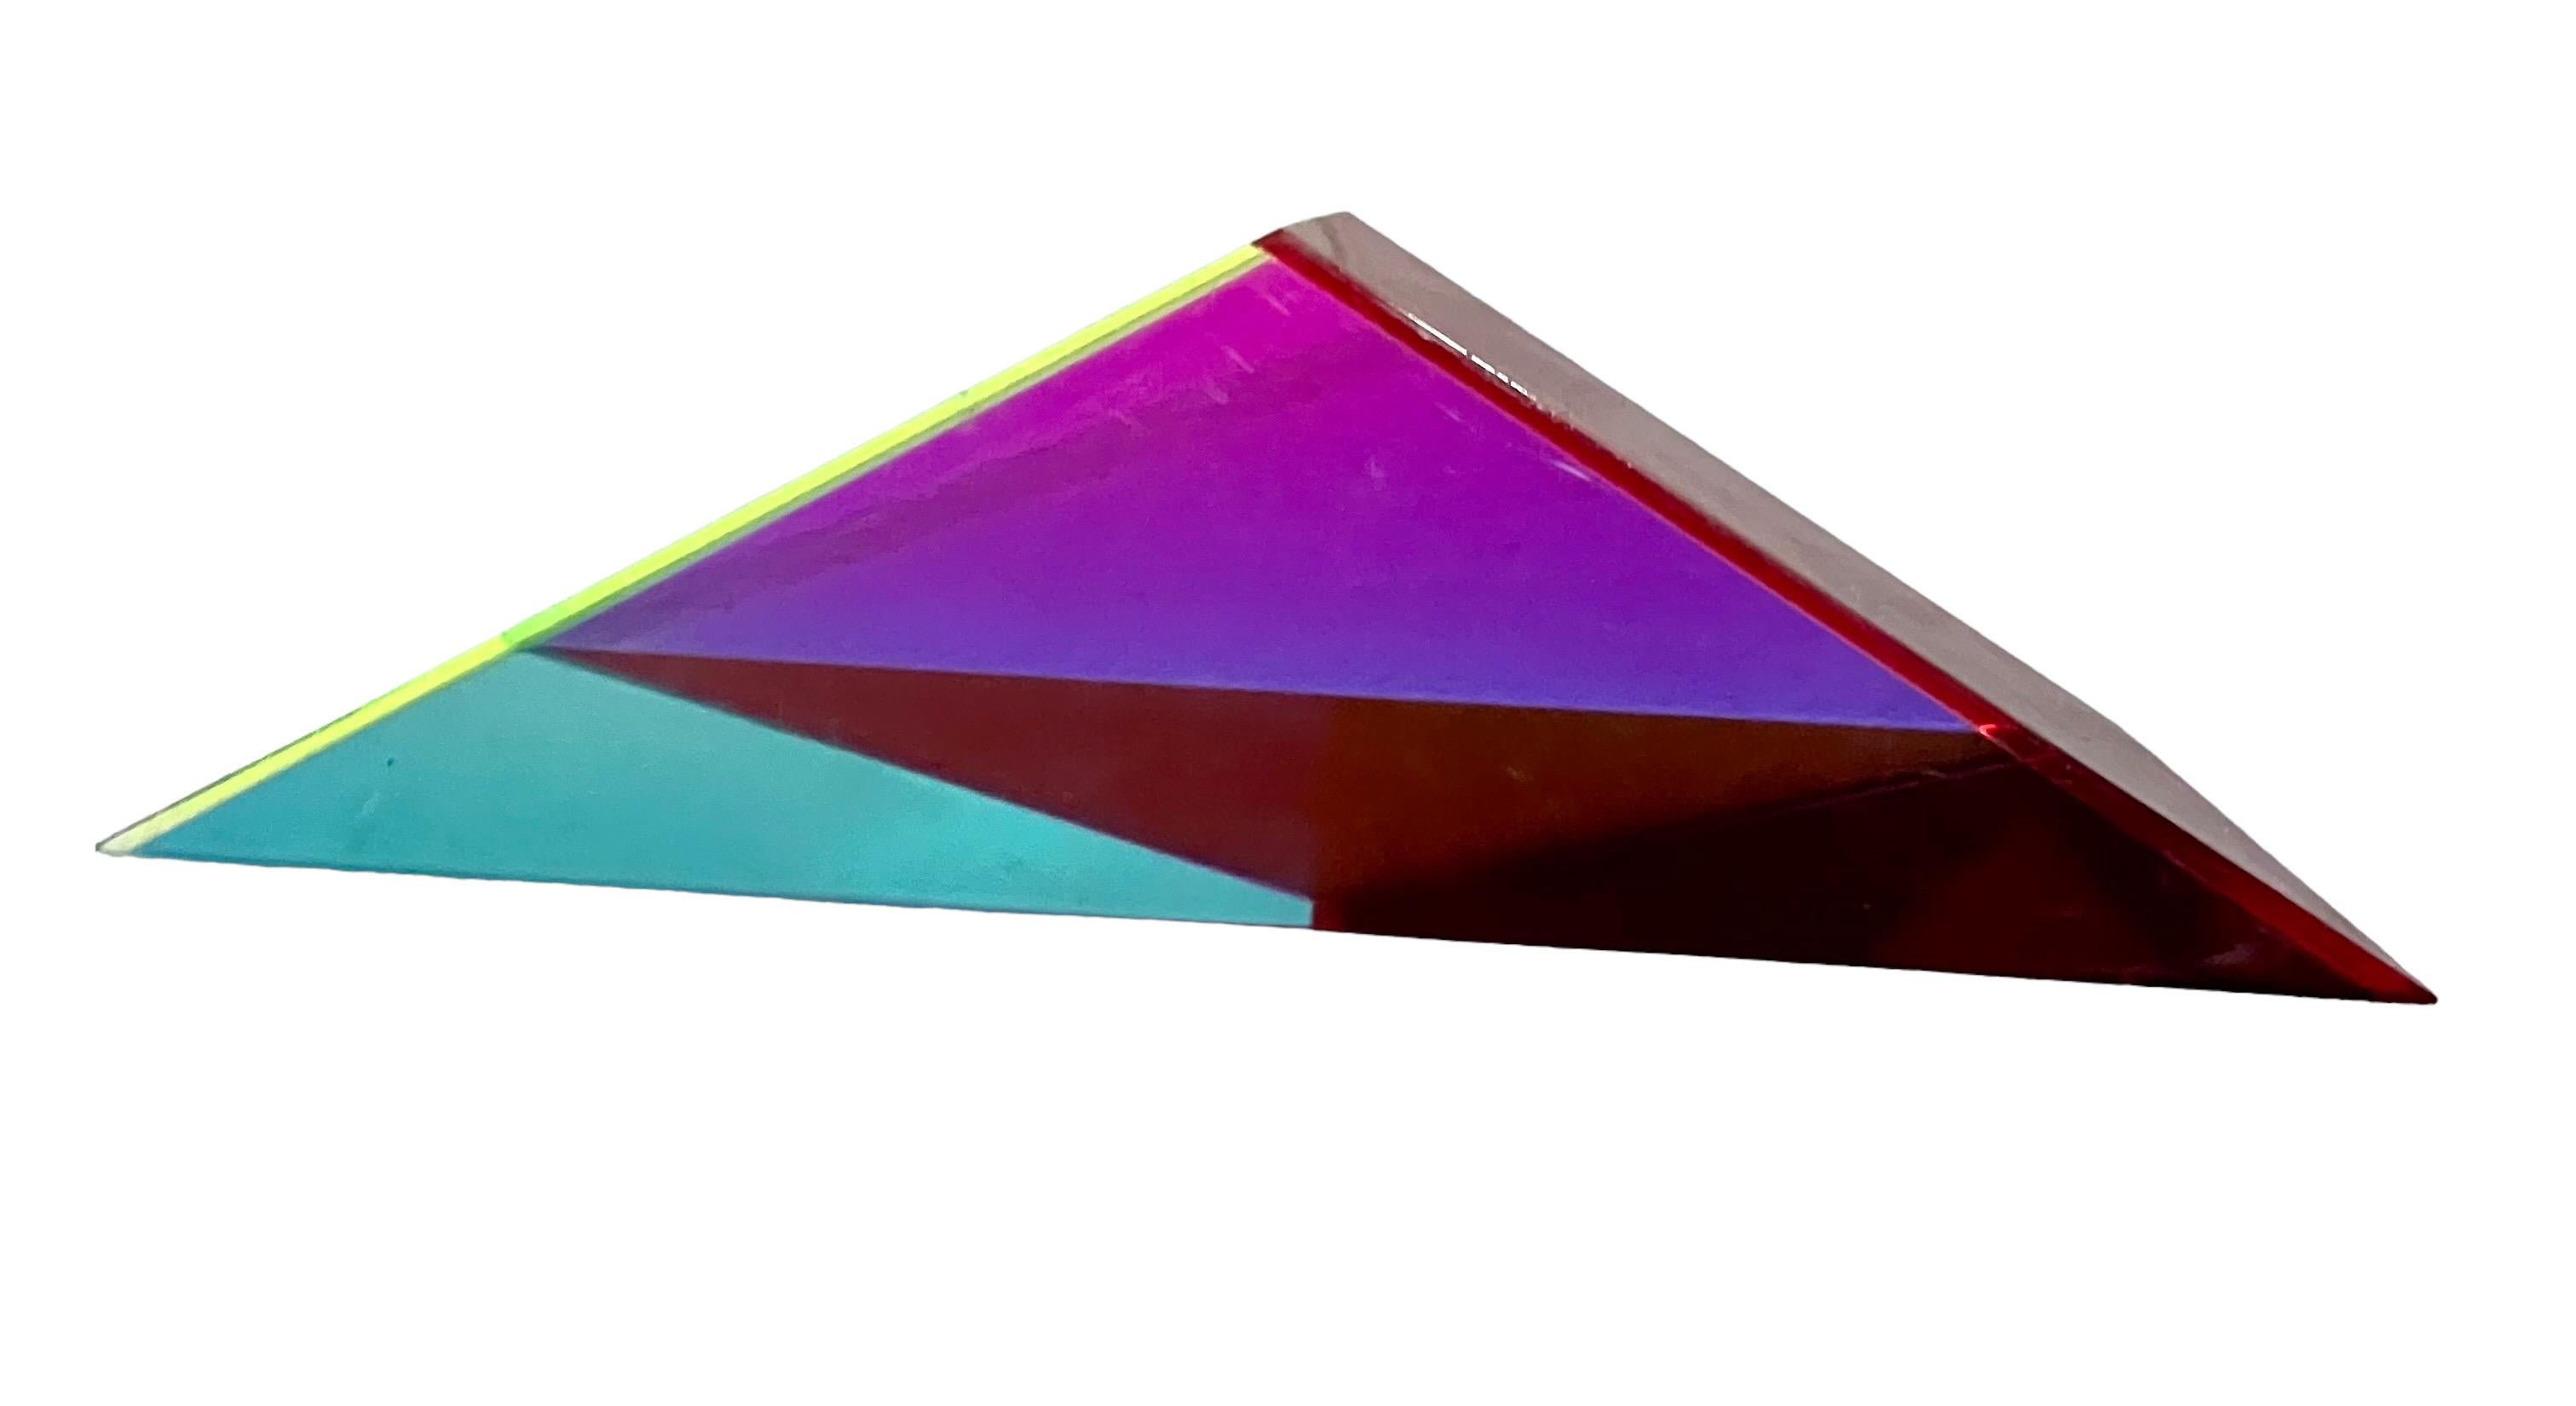 Vasa Velizar Mihich Abstract Sculpture - Hand Signed Dated 1993 Colorful Acrylic Vasa Laminated Lucite Triangle Sculpture